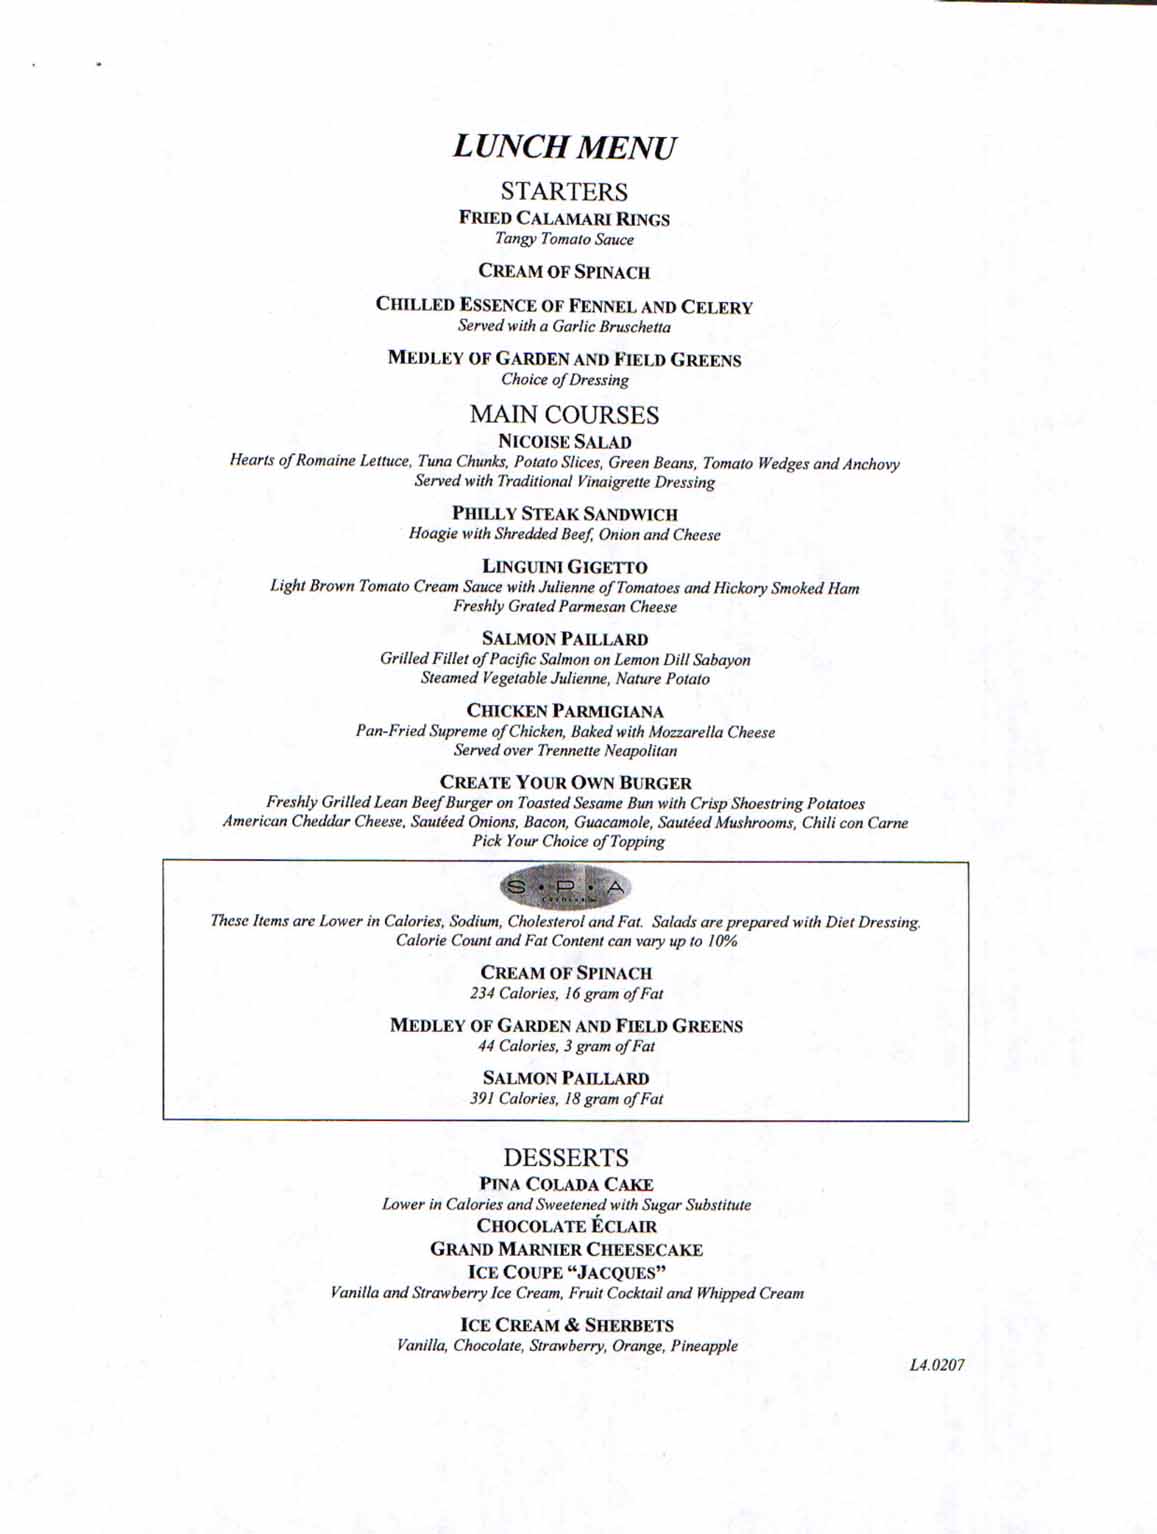 Carnival Dream Lunch Menu 4 (now they have a brunch instead)